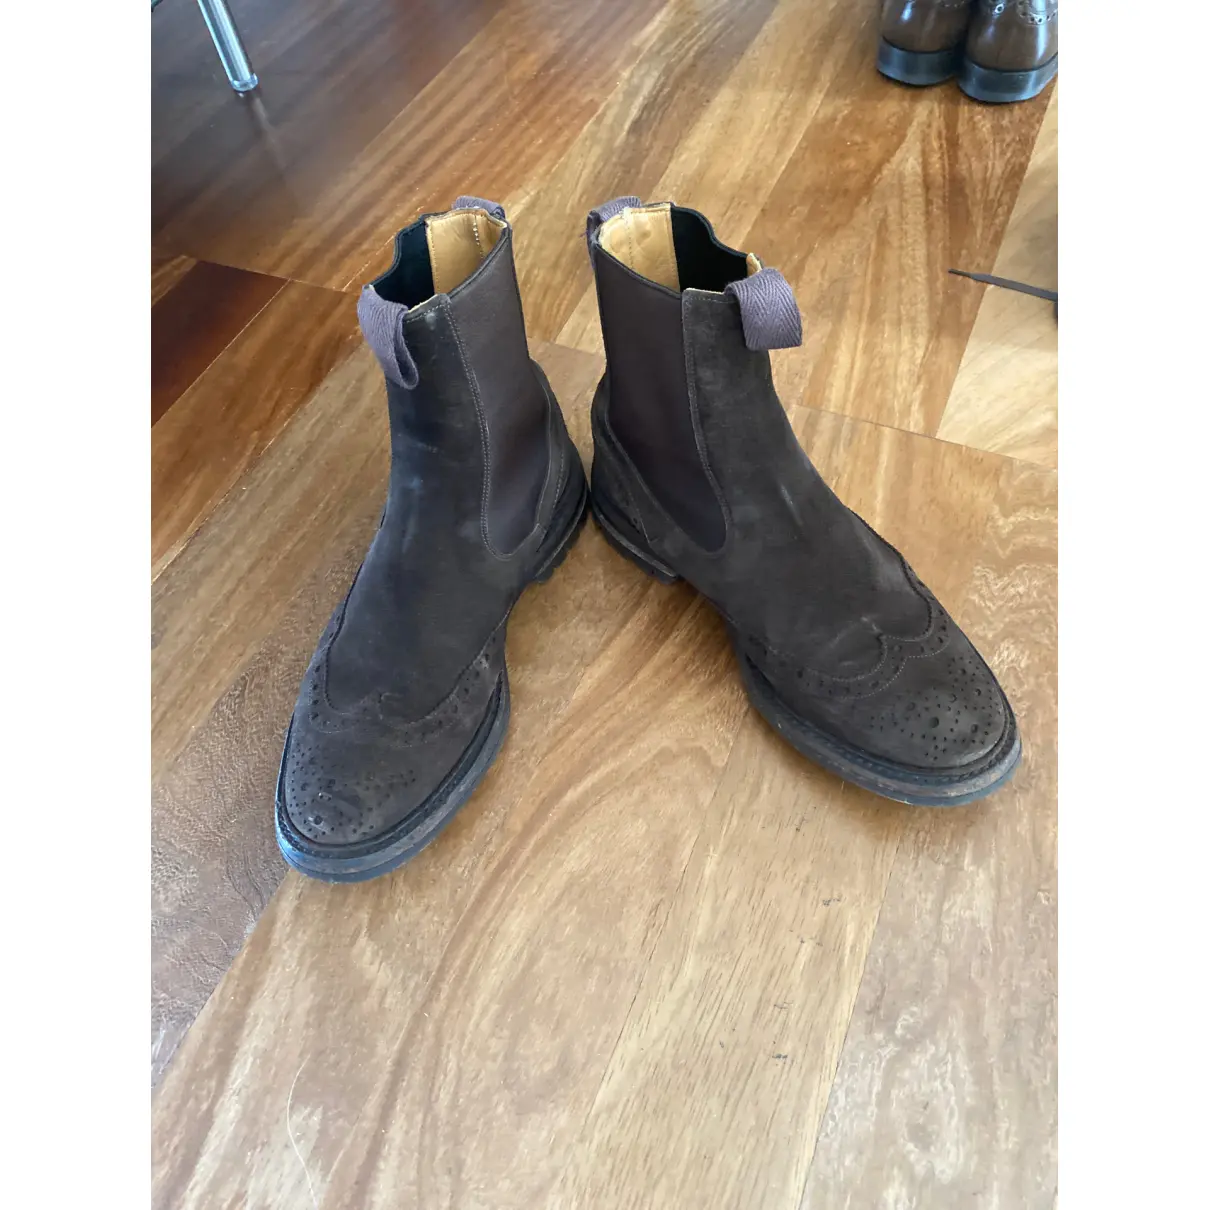 Buy Trickers London Boots online